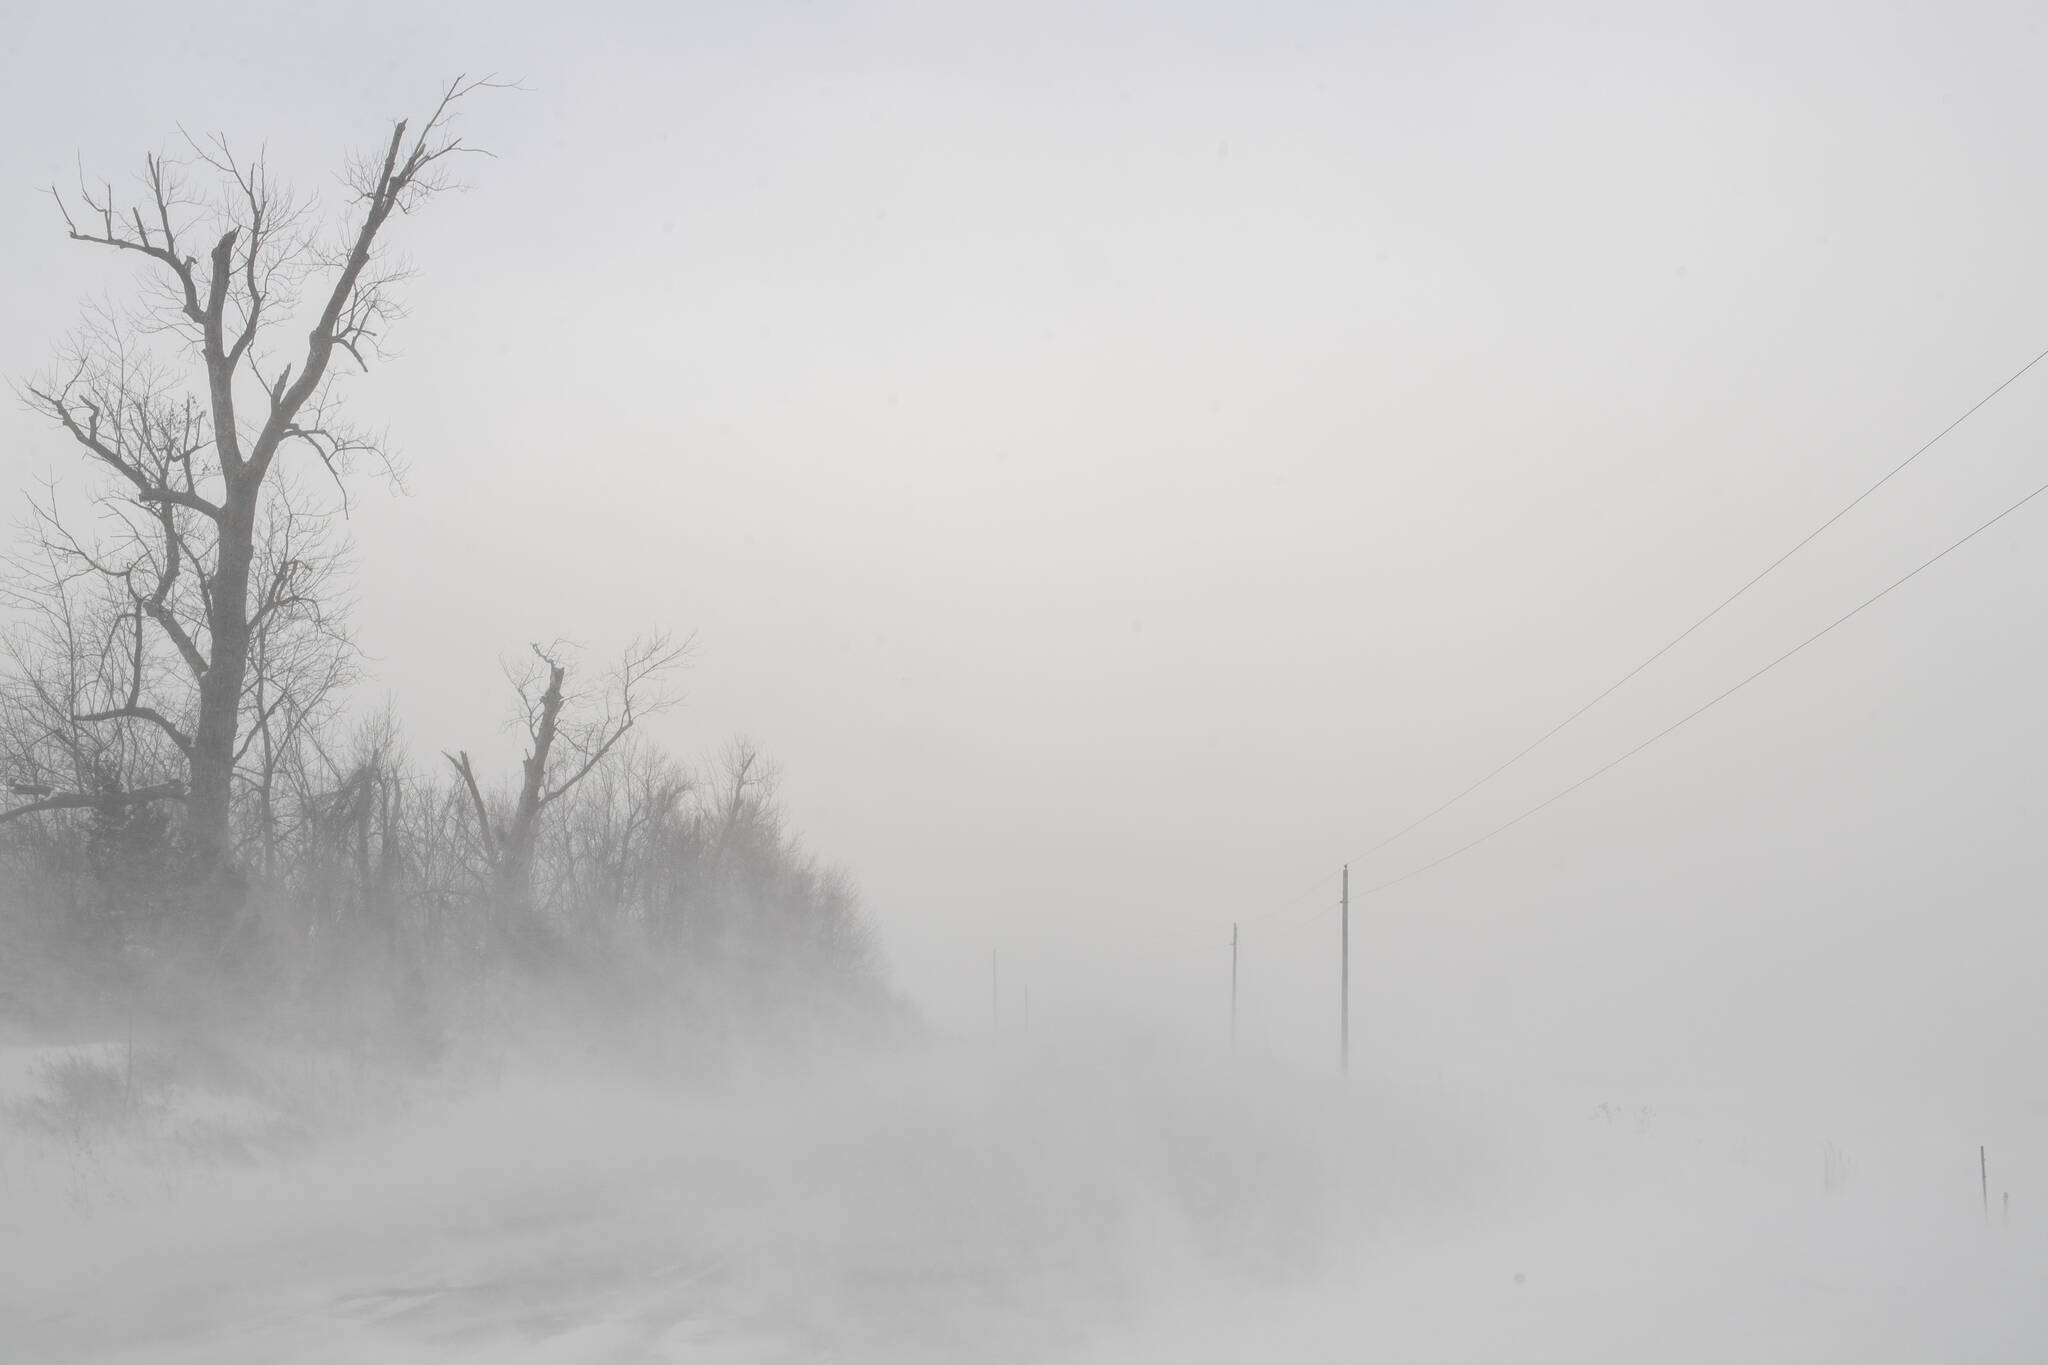 Blowing snow impairs visibility in rural Linn County, Iowa, on Friday, Dec. 23, 2022. A winter storm brought wind chill values of more than 30 degrees below zero and whiteout conditions to Eastern Iowa. (Nick Rohlman / The Gazette)